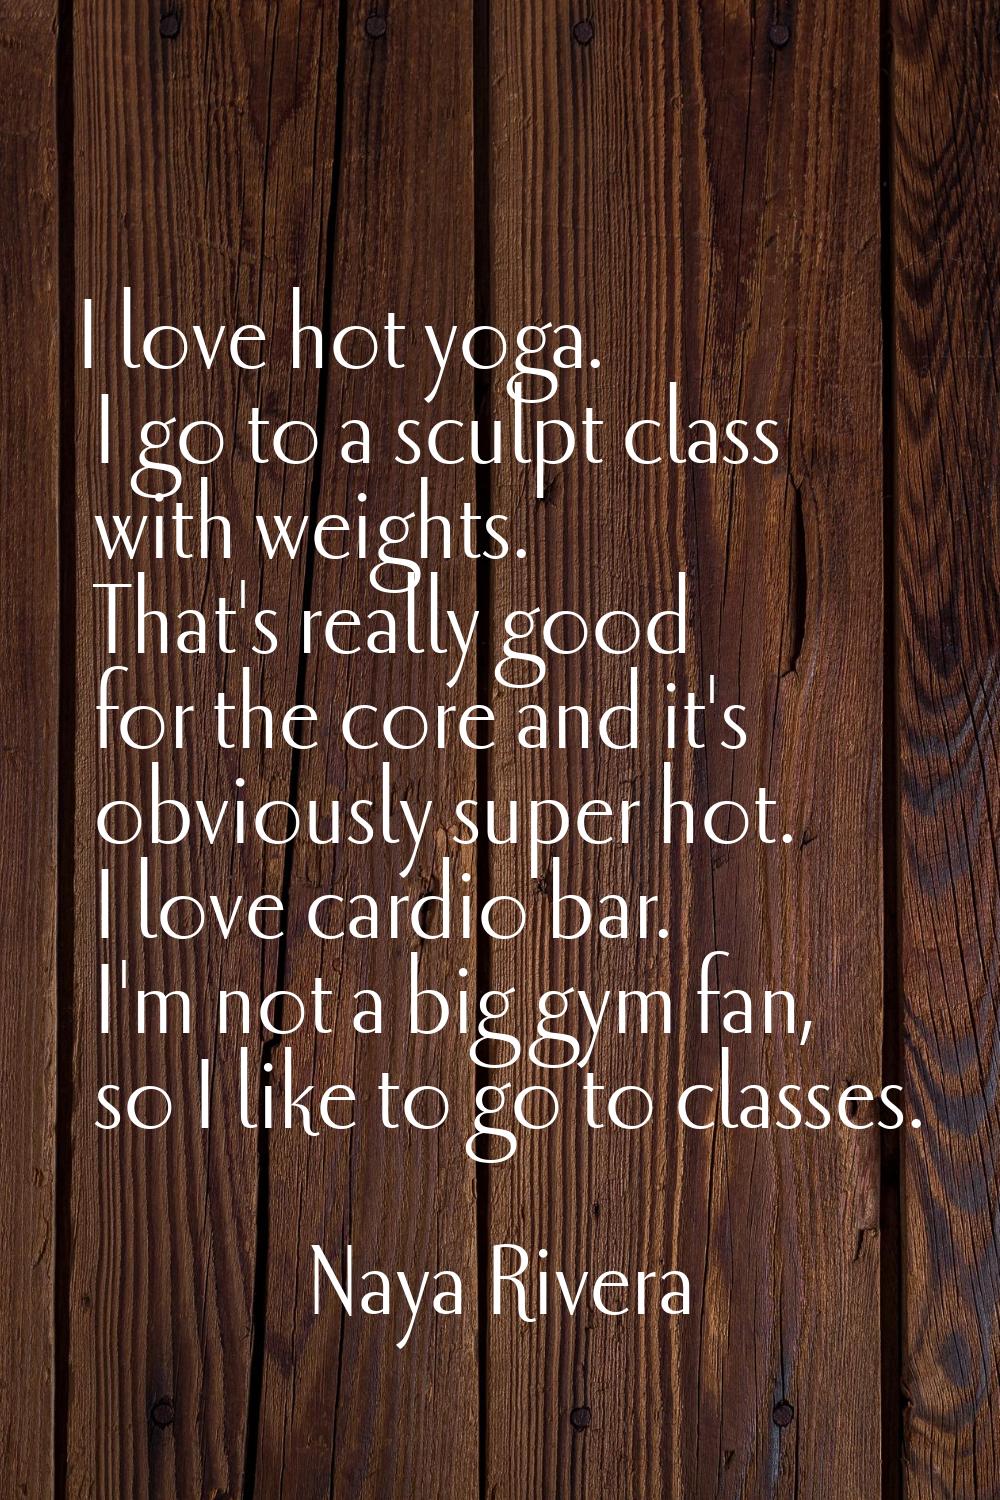 I love hot yoga. I go to a sculpt class with weights. That's really good for the core and it's obvi